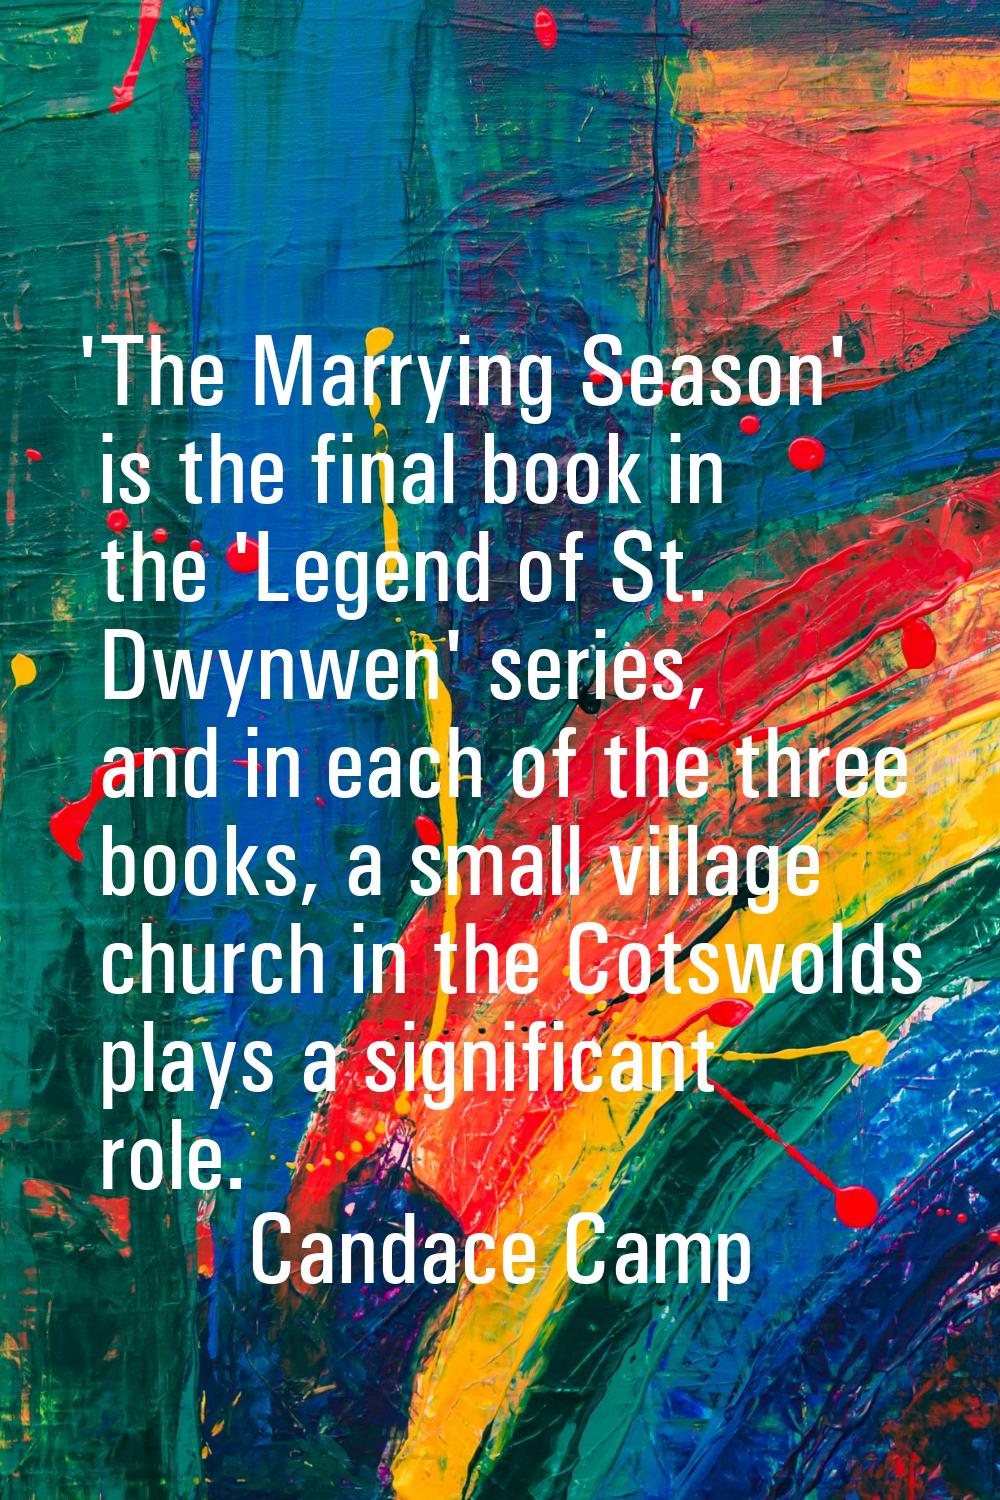 'The Marrying Season' is the final book in the 'Legend of St. Dwynwen' series, and in each of the t